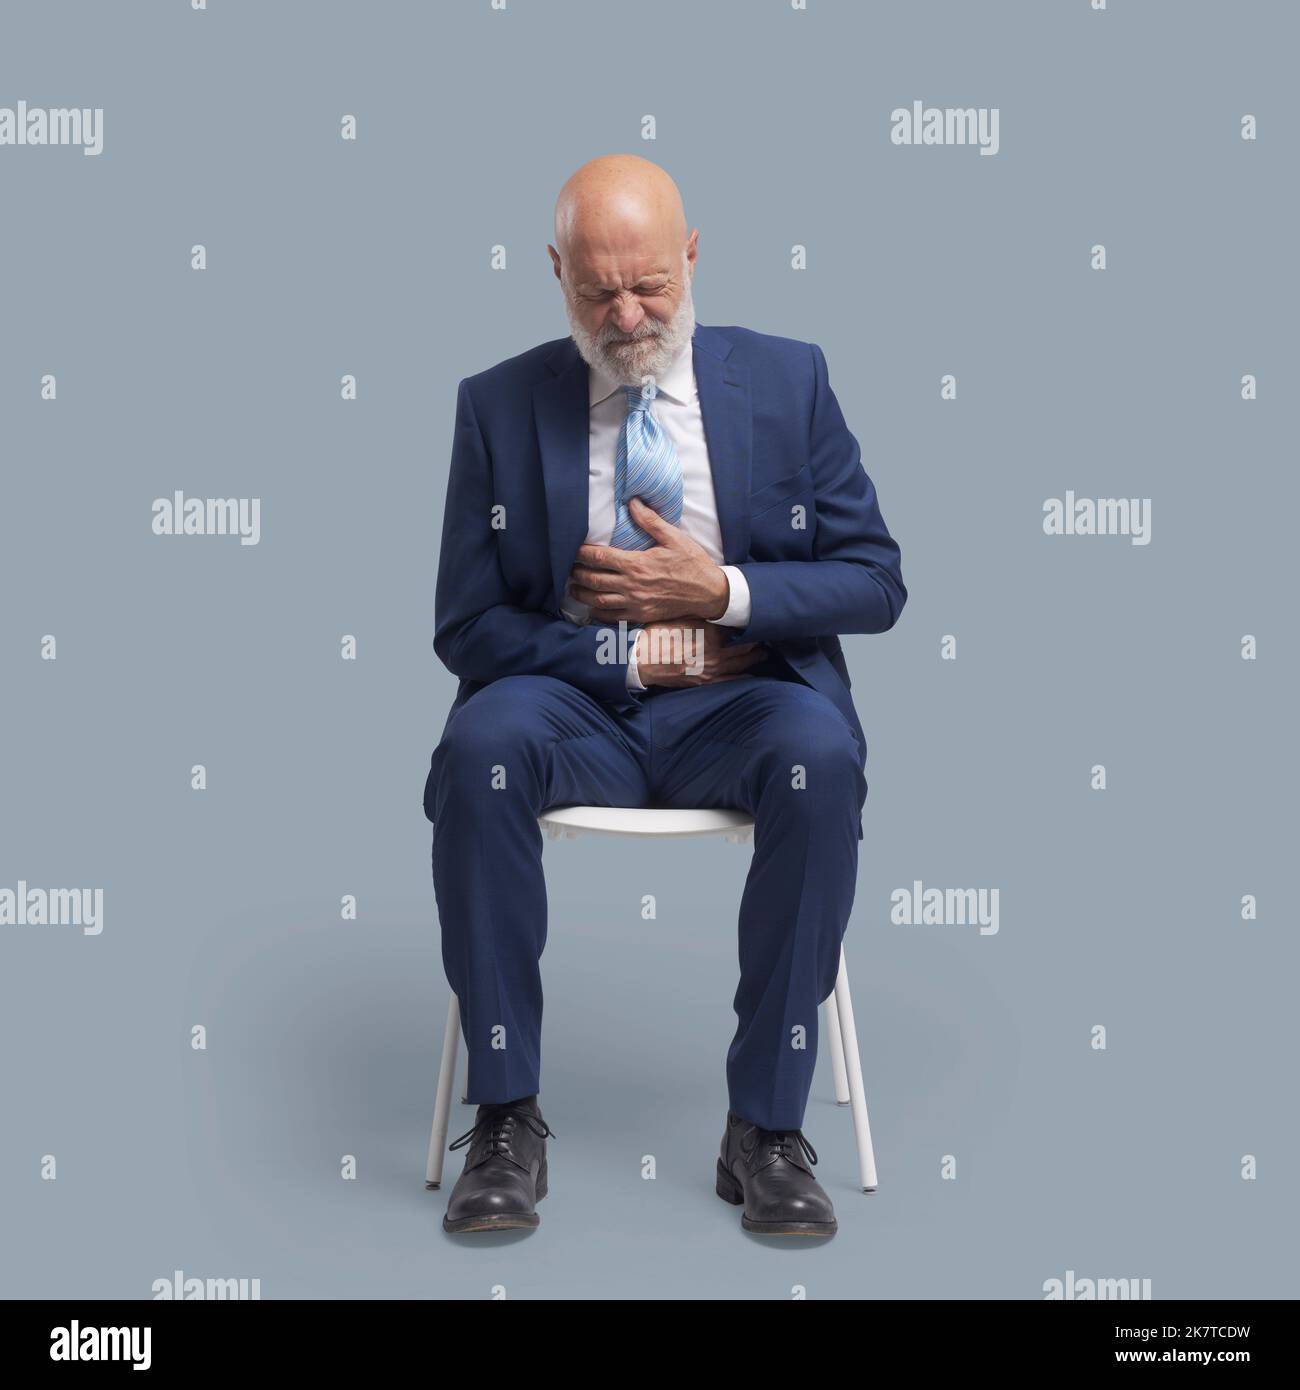 Senior man sitting on a chair and having a bad stomach ache Stock Photo